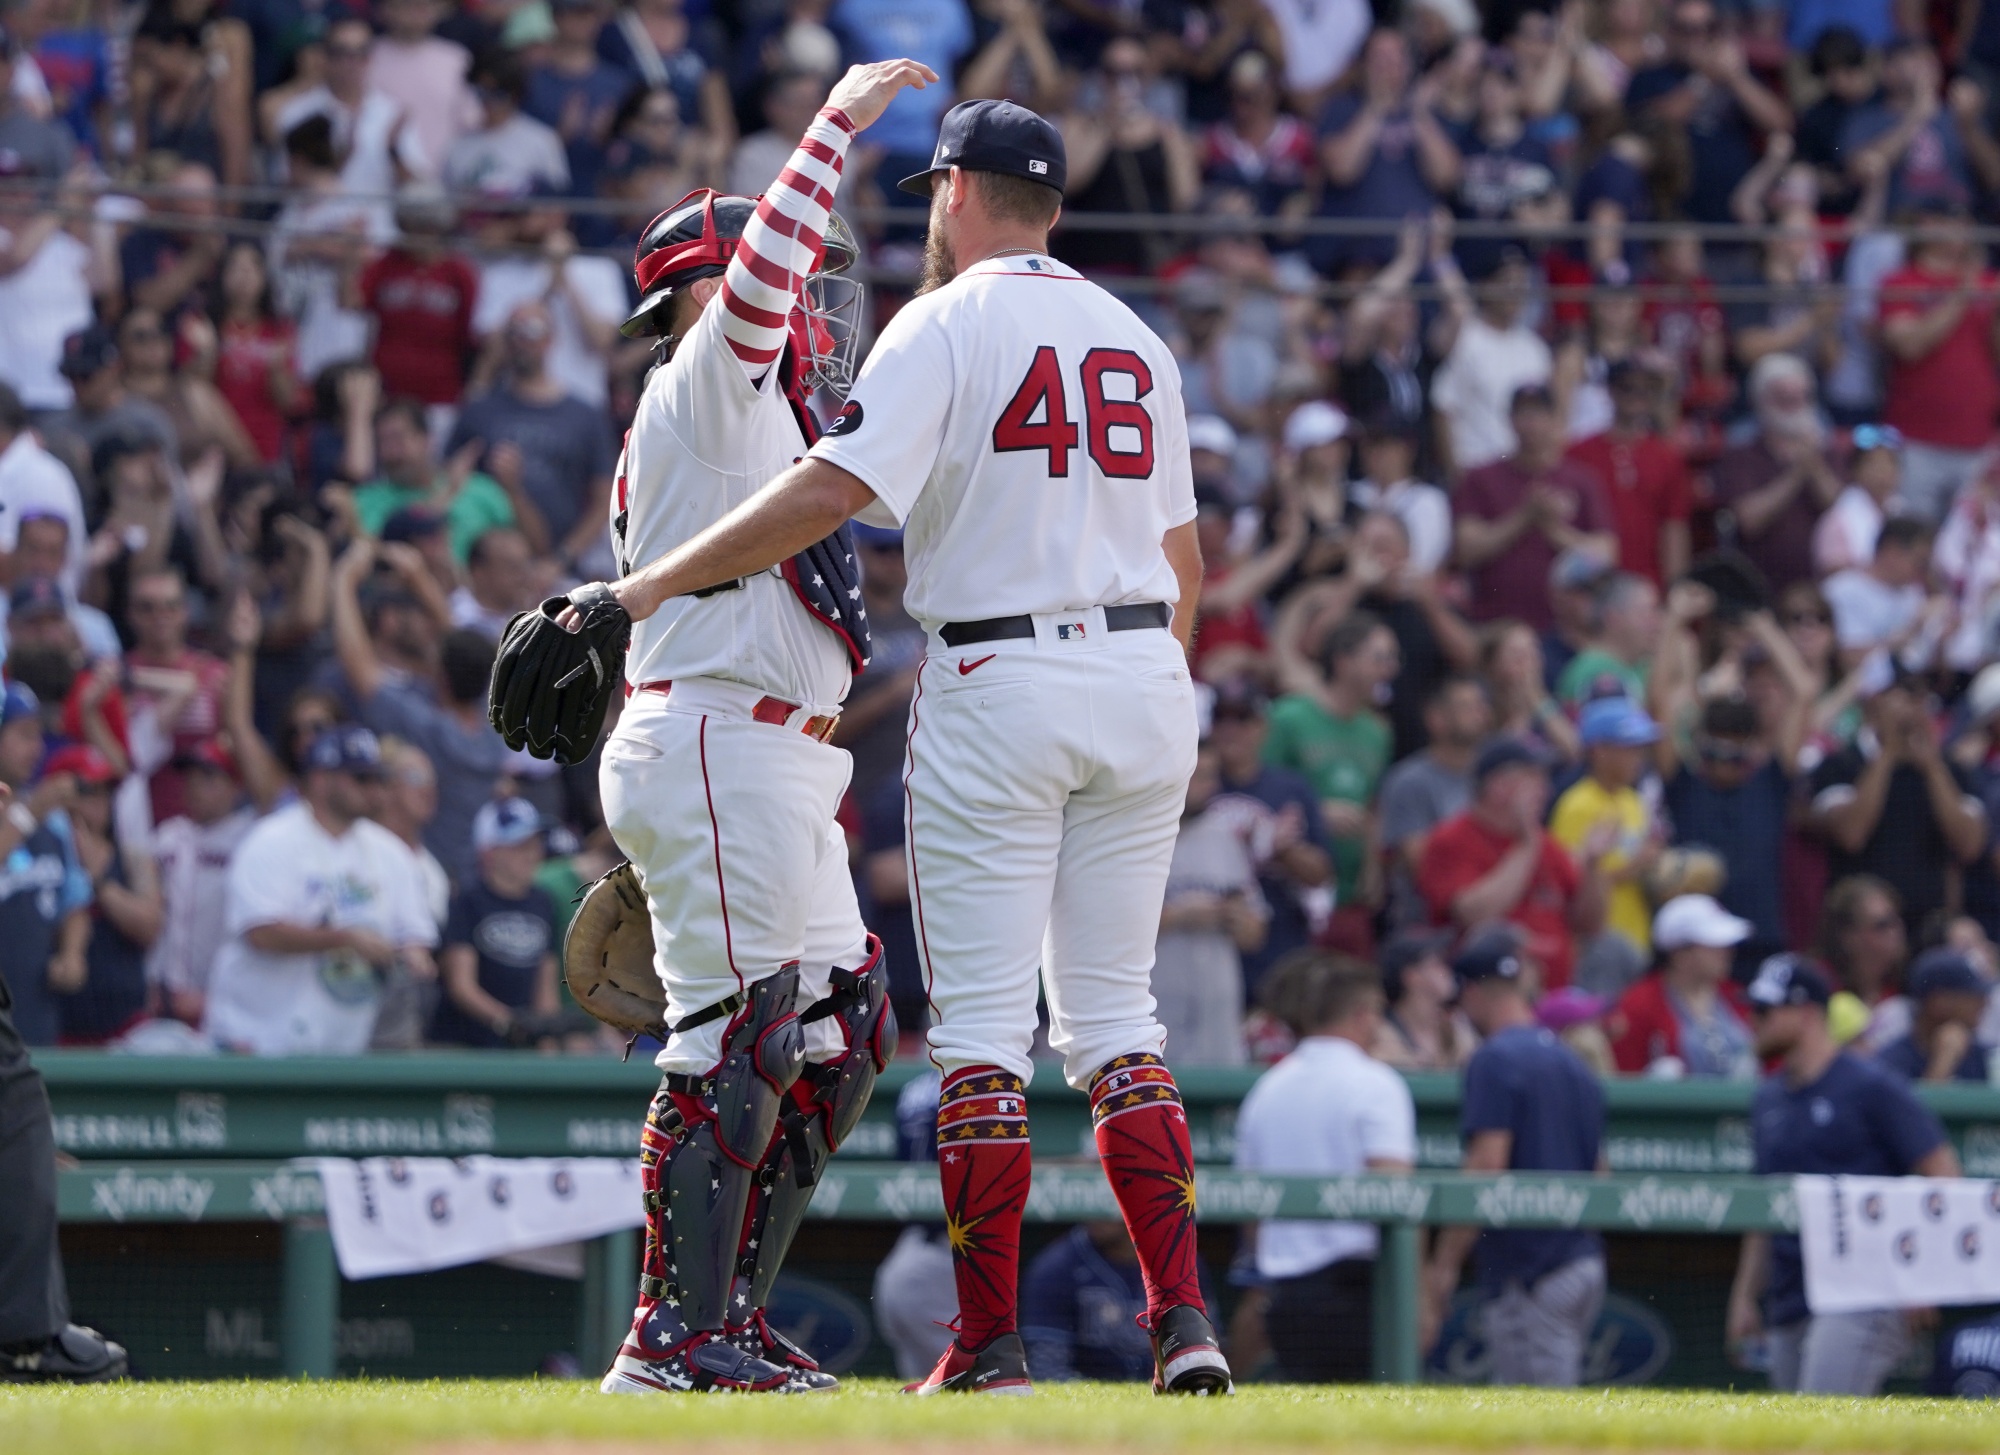 Worcester Red Sox on X: Finish your day with an updated wallpaper